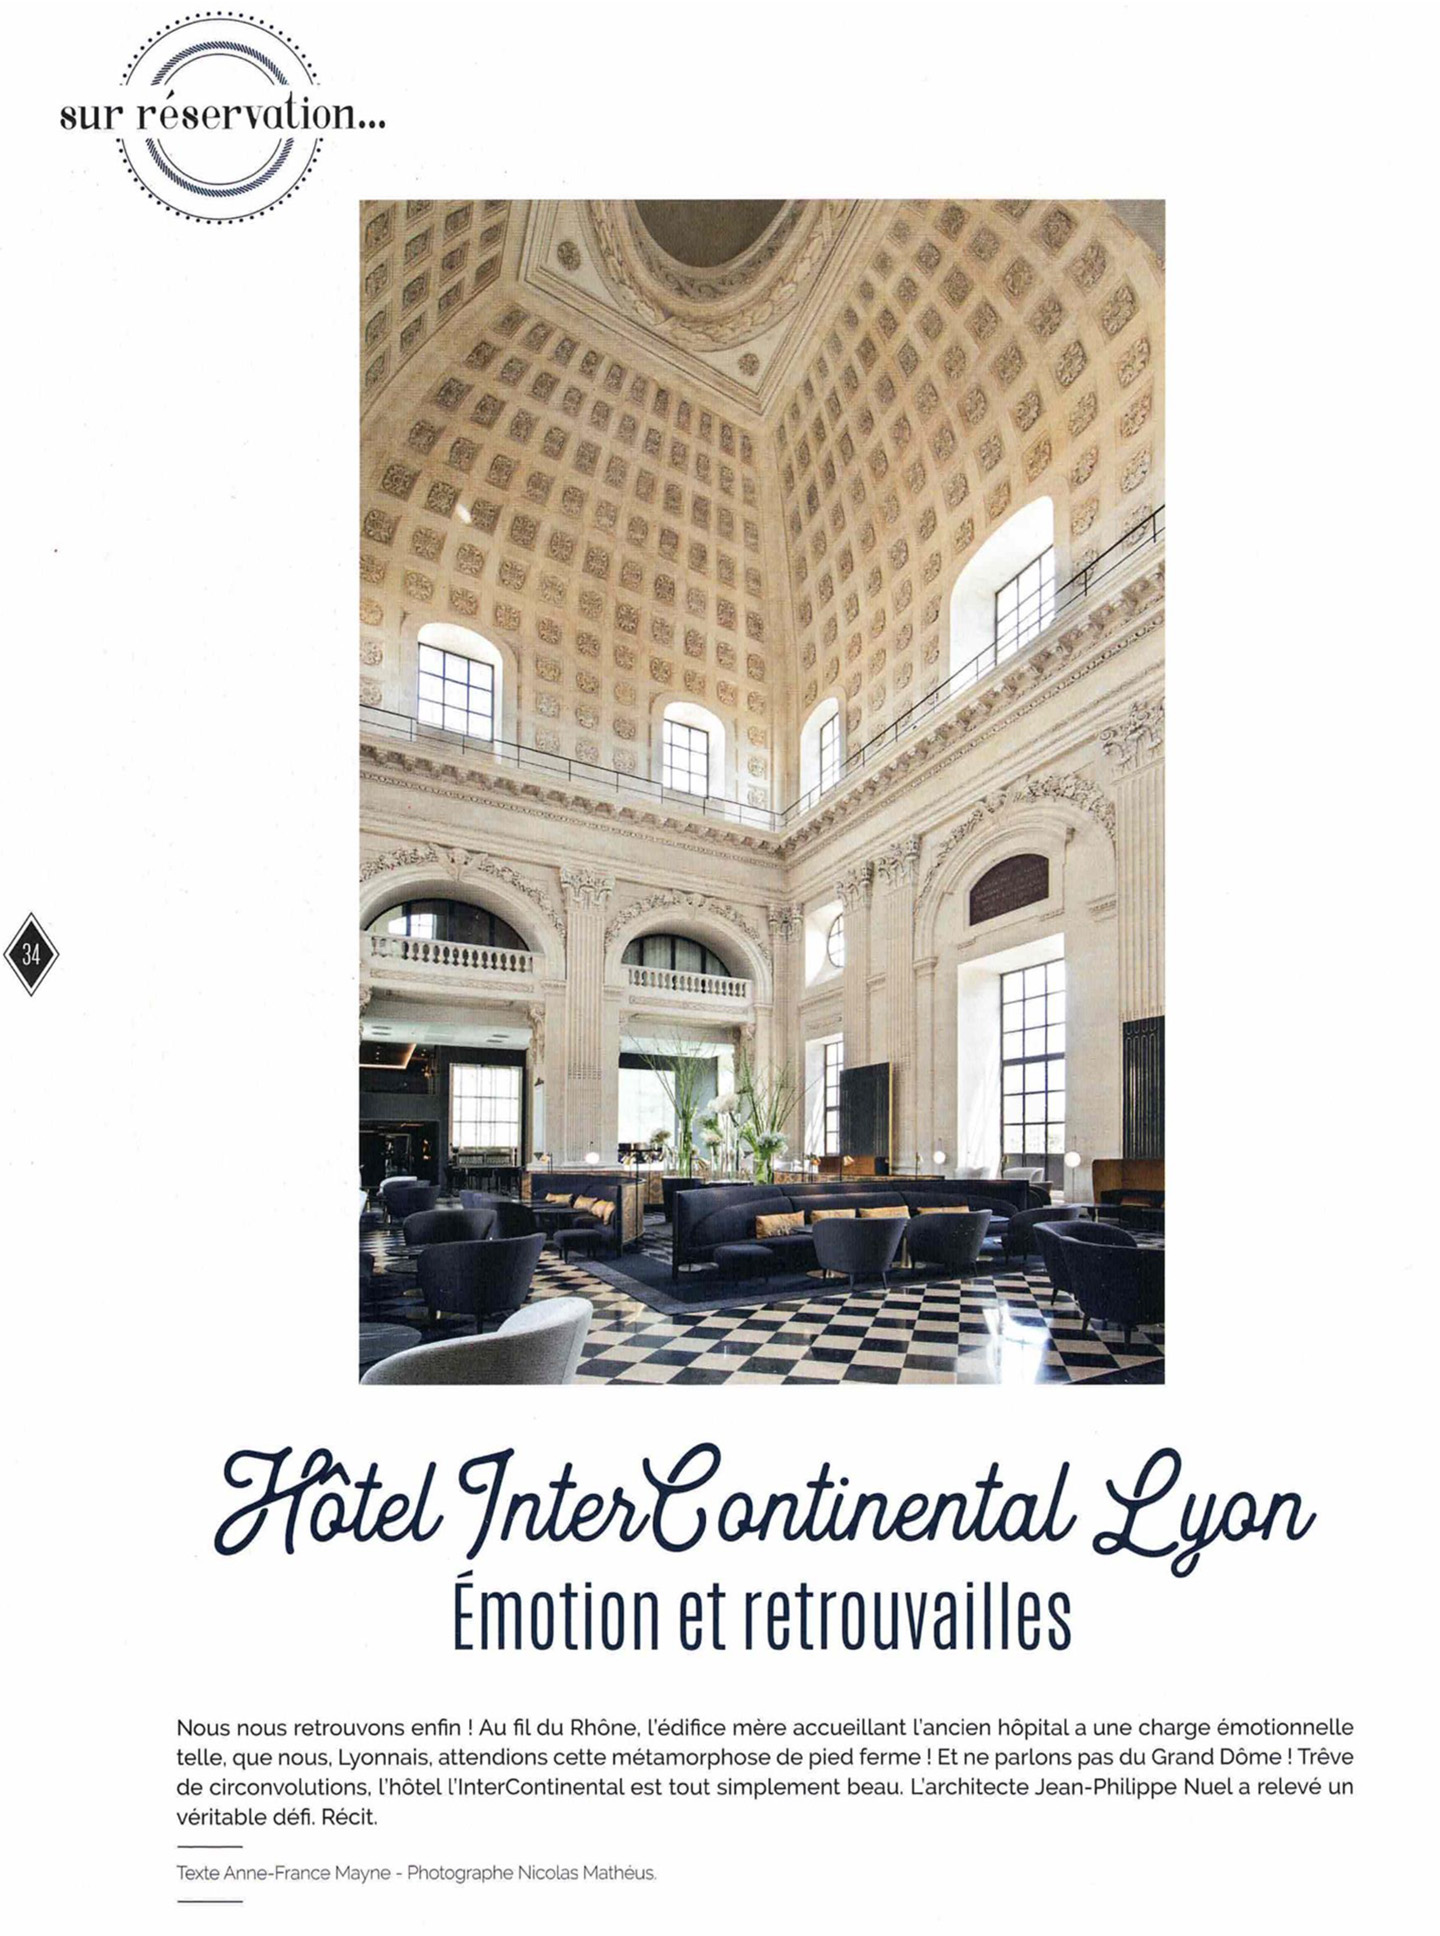 Article on the InterContinental Lyon Hotel Dieu realized by the studio jean-Philippe Nuel in the magazine domodéco, new luxury hotel, luxury interior design, historical heritage